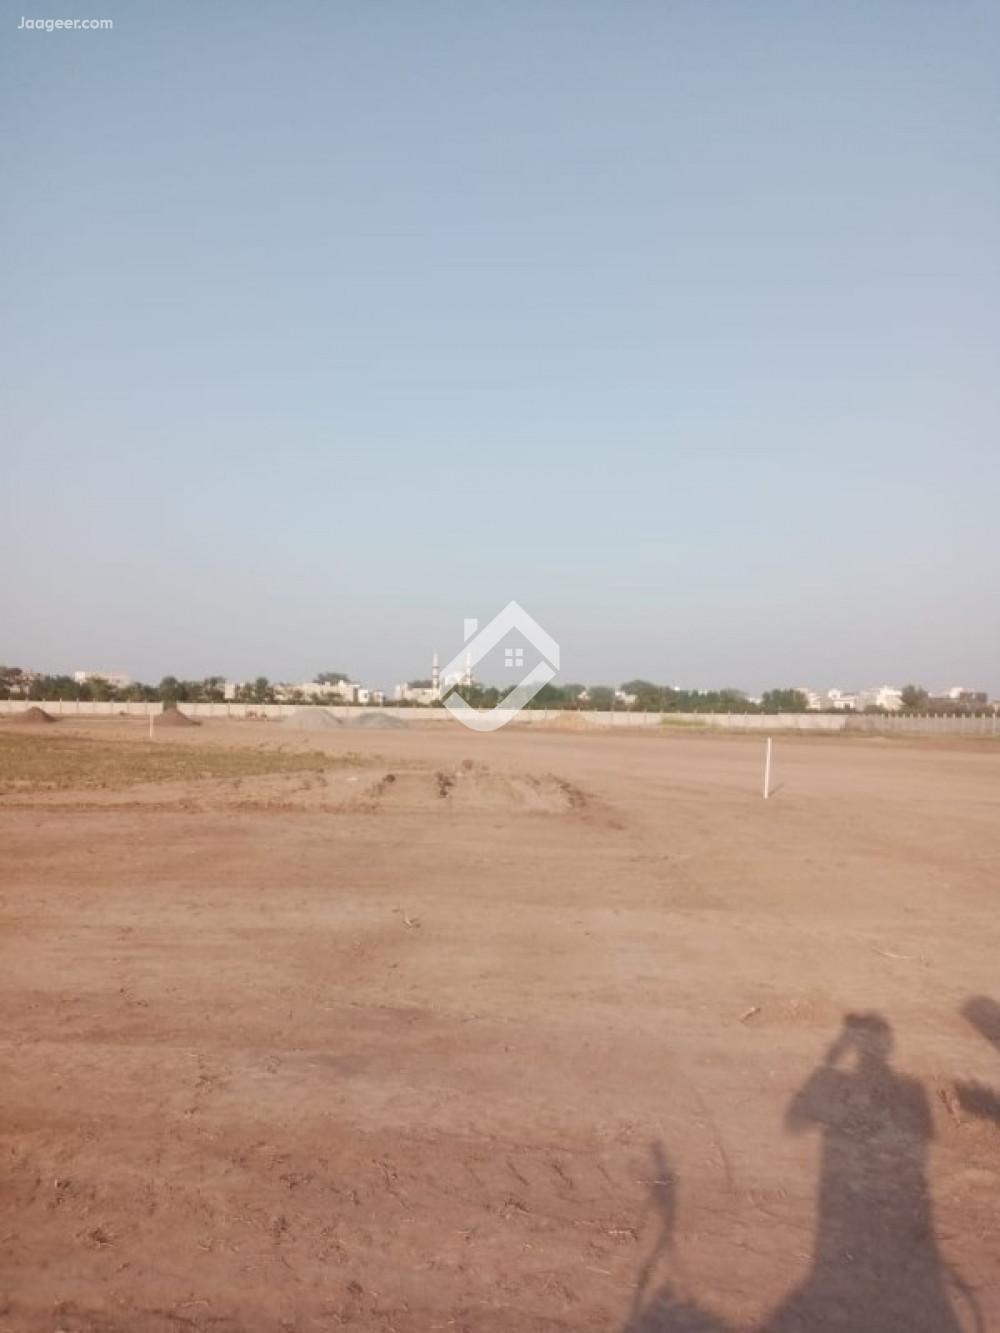 Main image 8 Marla Residential Plot For Sale In National City ------